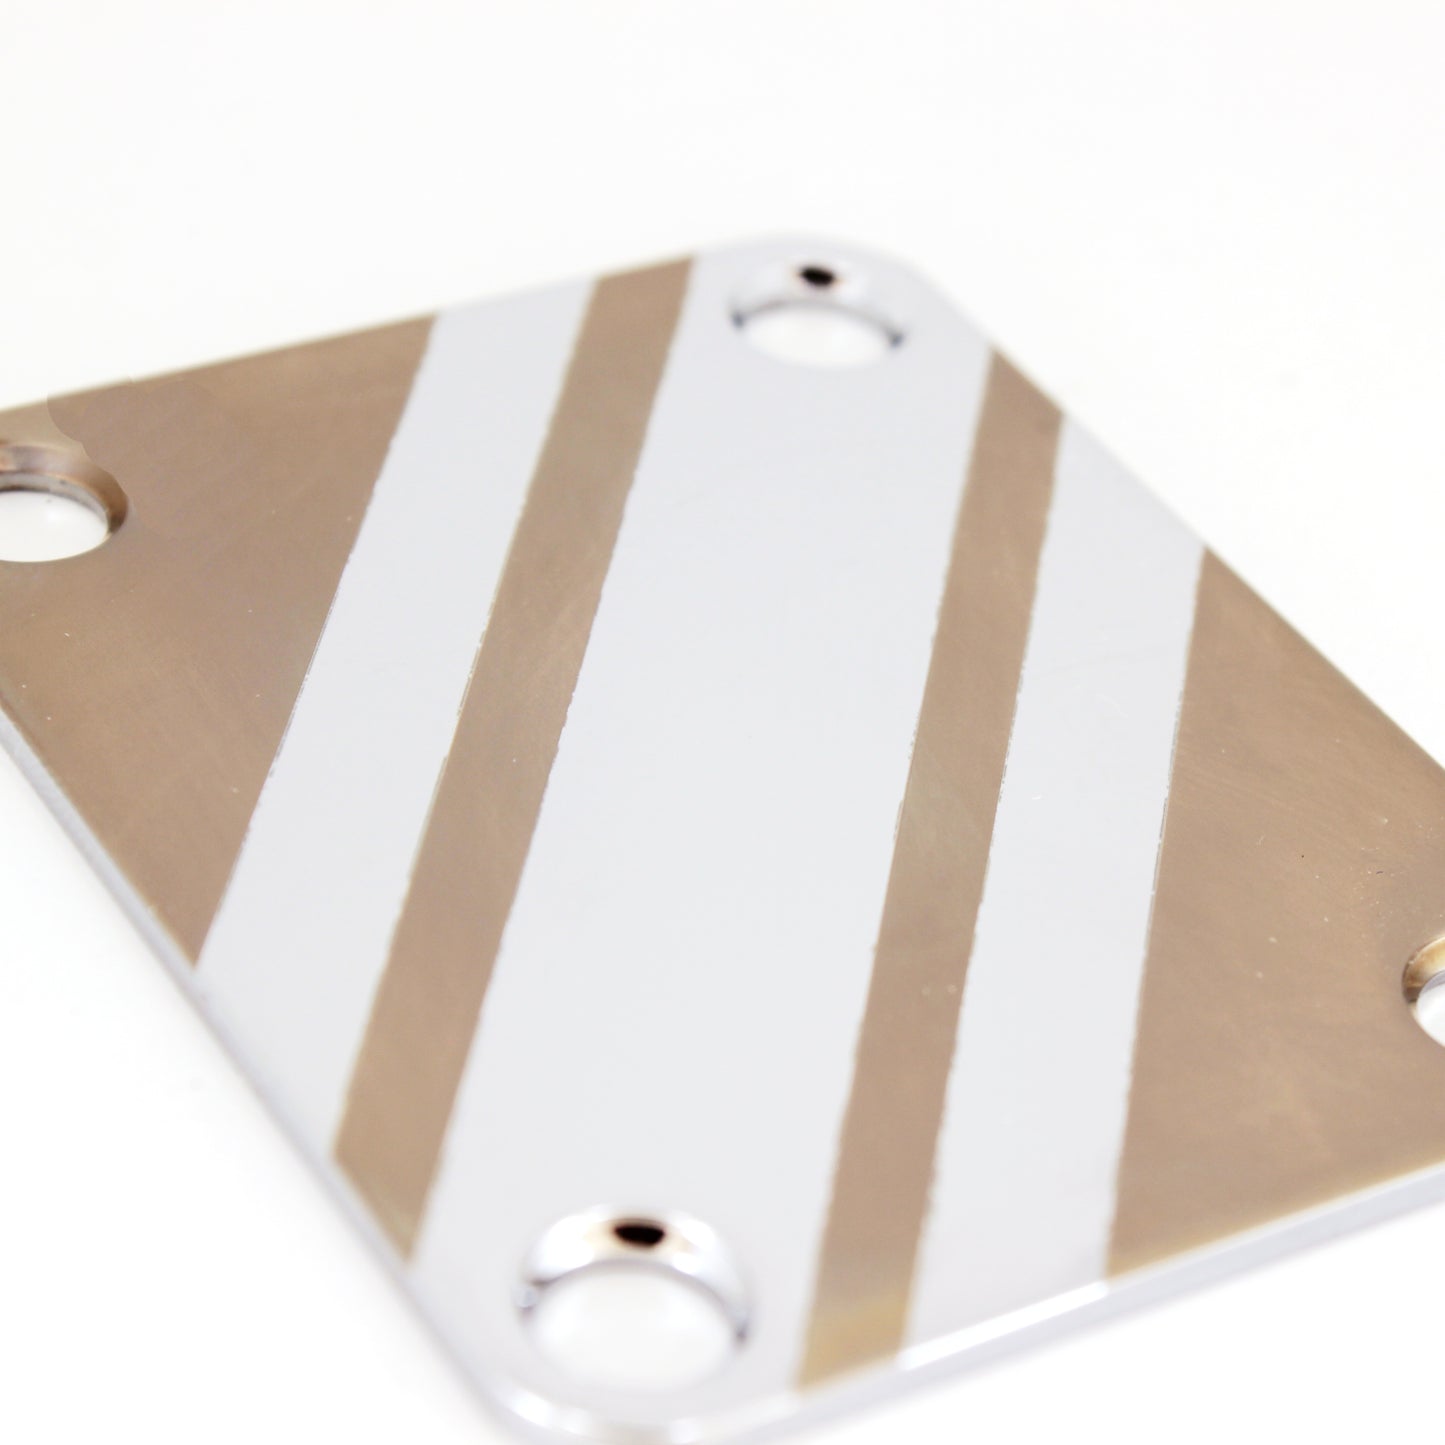 Guitar neck plate - Chrome competition stripes - Fender size